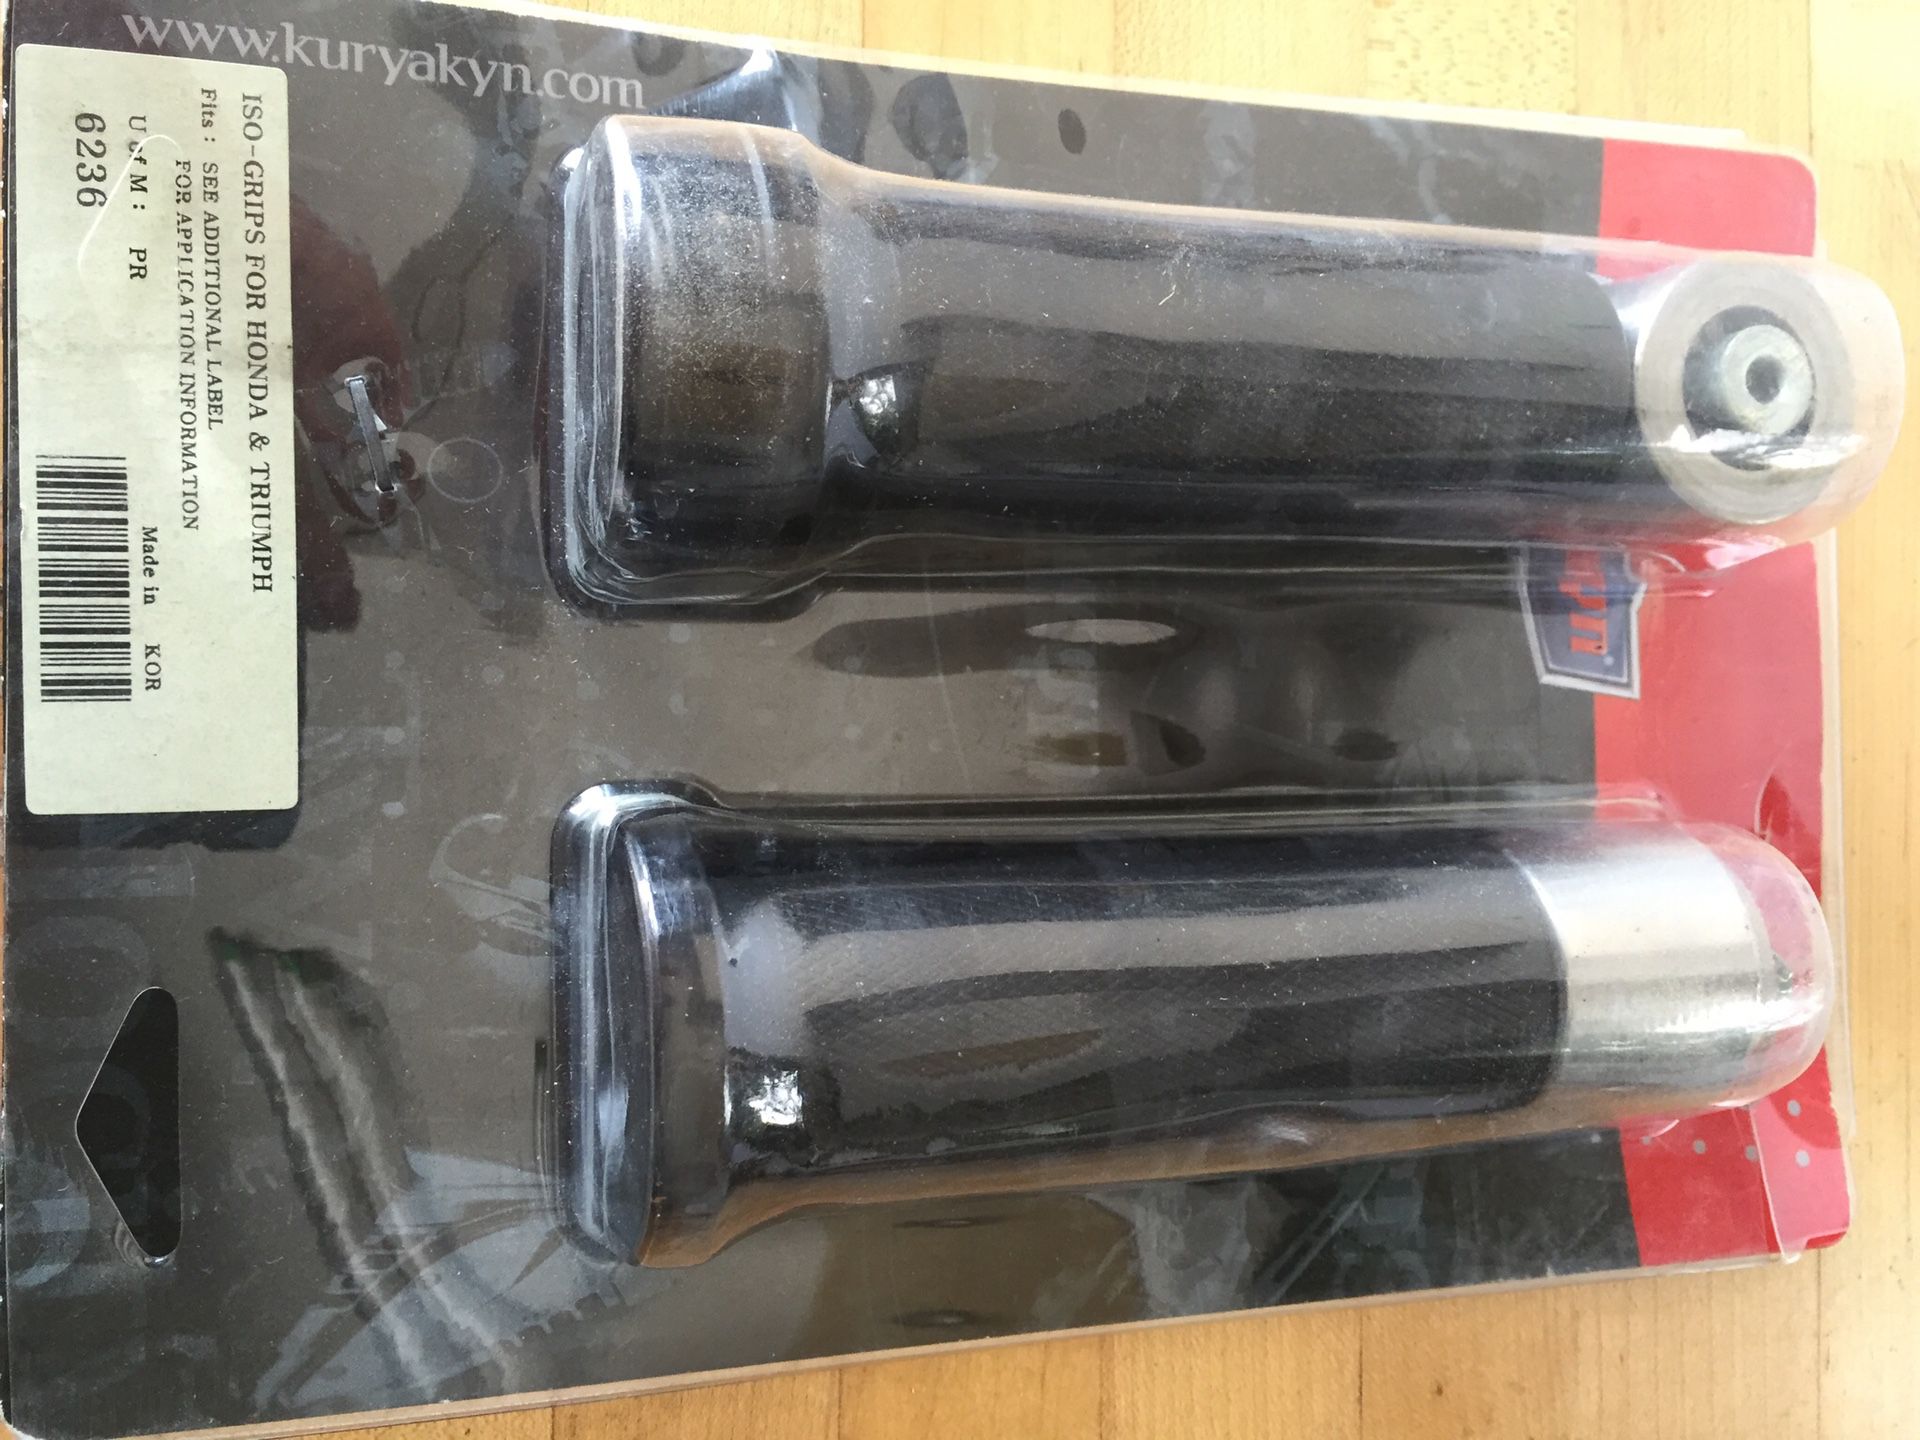 Triumph Rocket 3 OEM GRIPS and Heated Grips